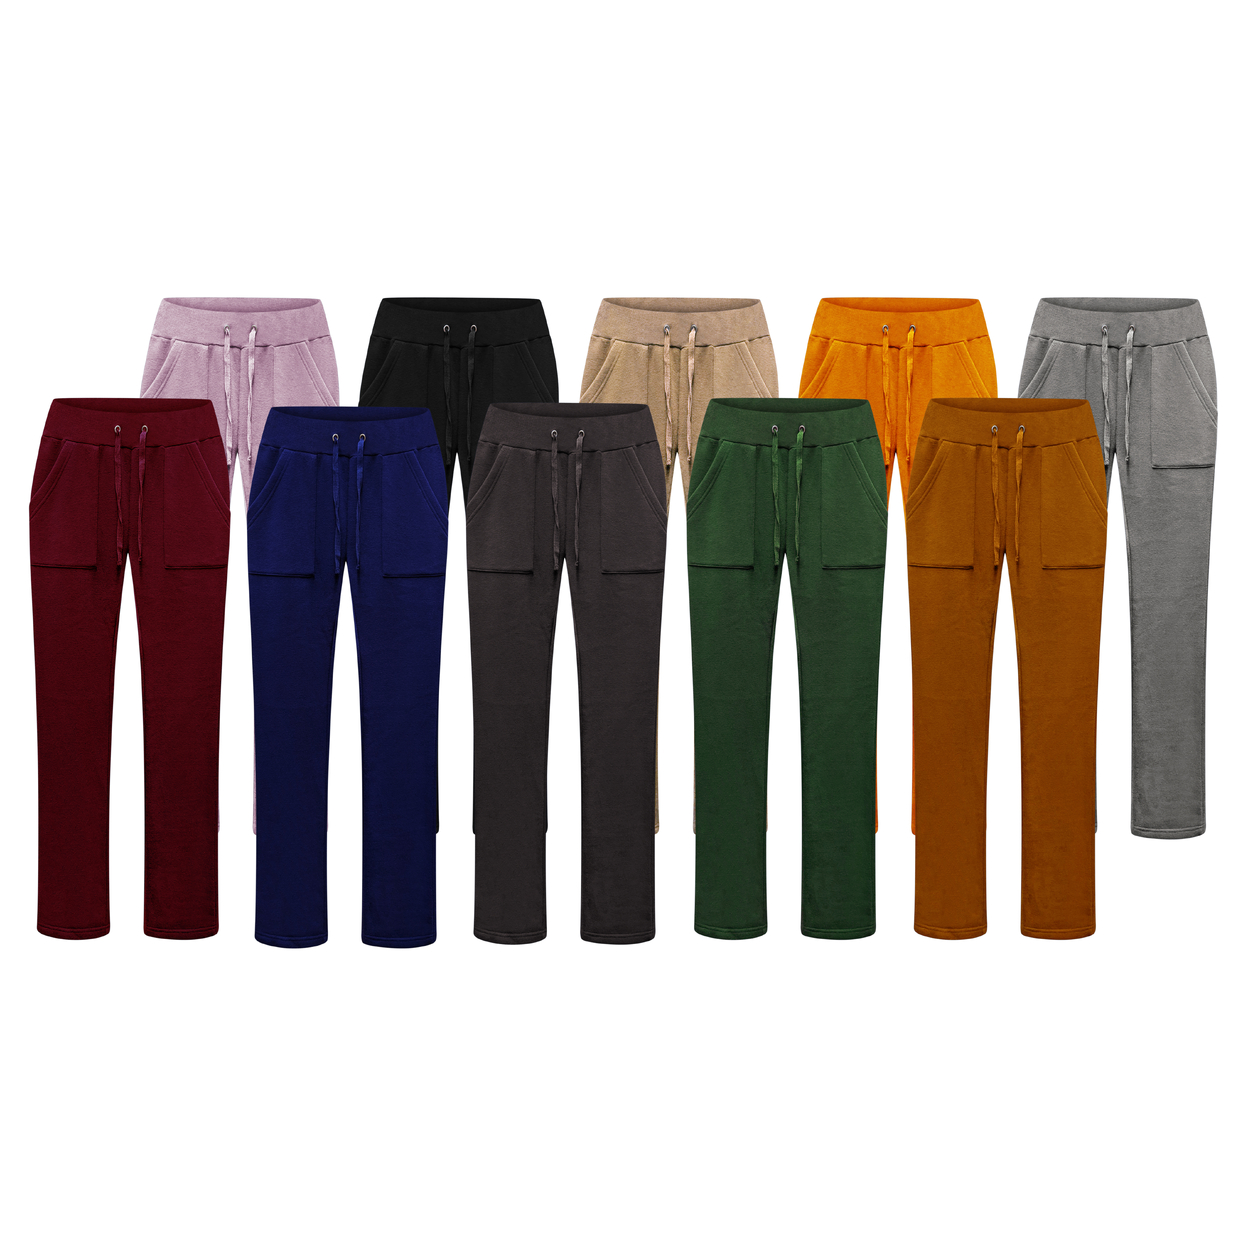 3-Pack: Women's Ultra-Soft Cozy Fleece Lined Elastic Waistband Terry Knit Pants - Small